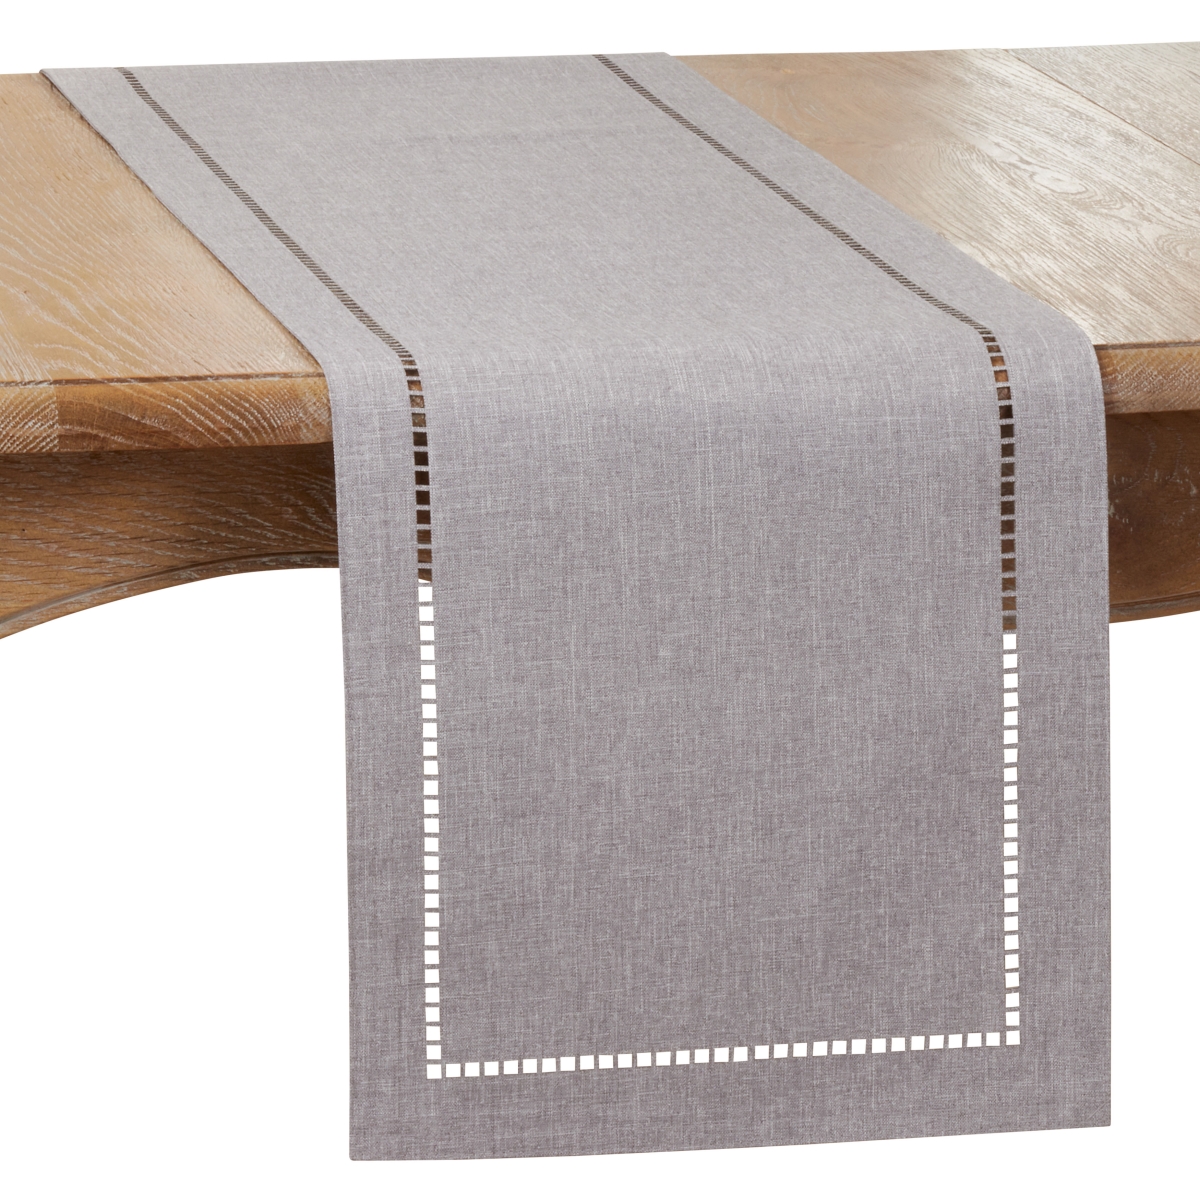 Picture of SARO 9738.GY14120B 14 x 120 in. Oblong Gray Laser-Cut Hemstitch Table Runner